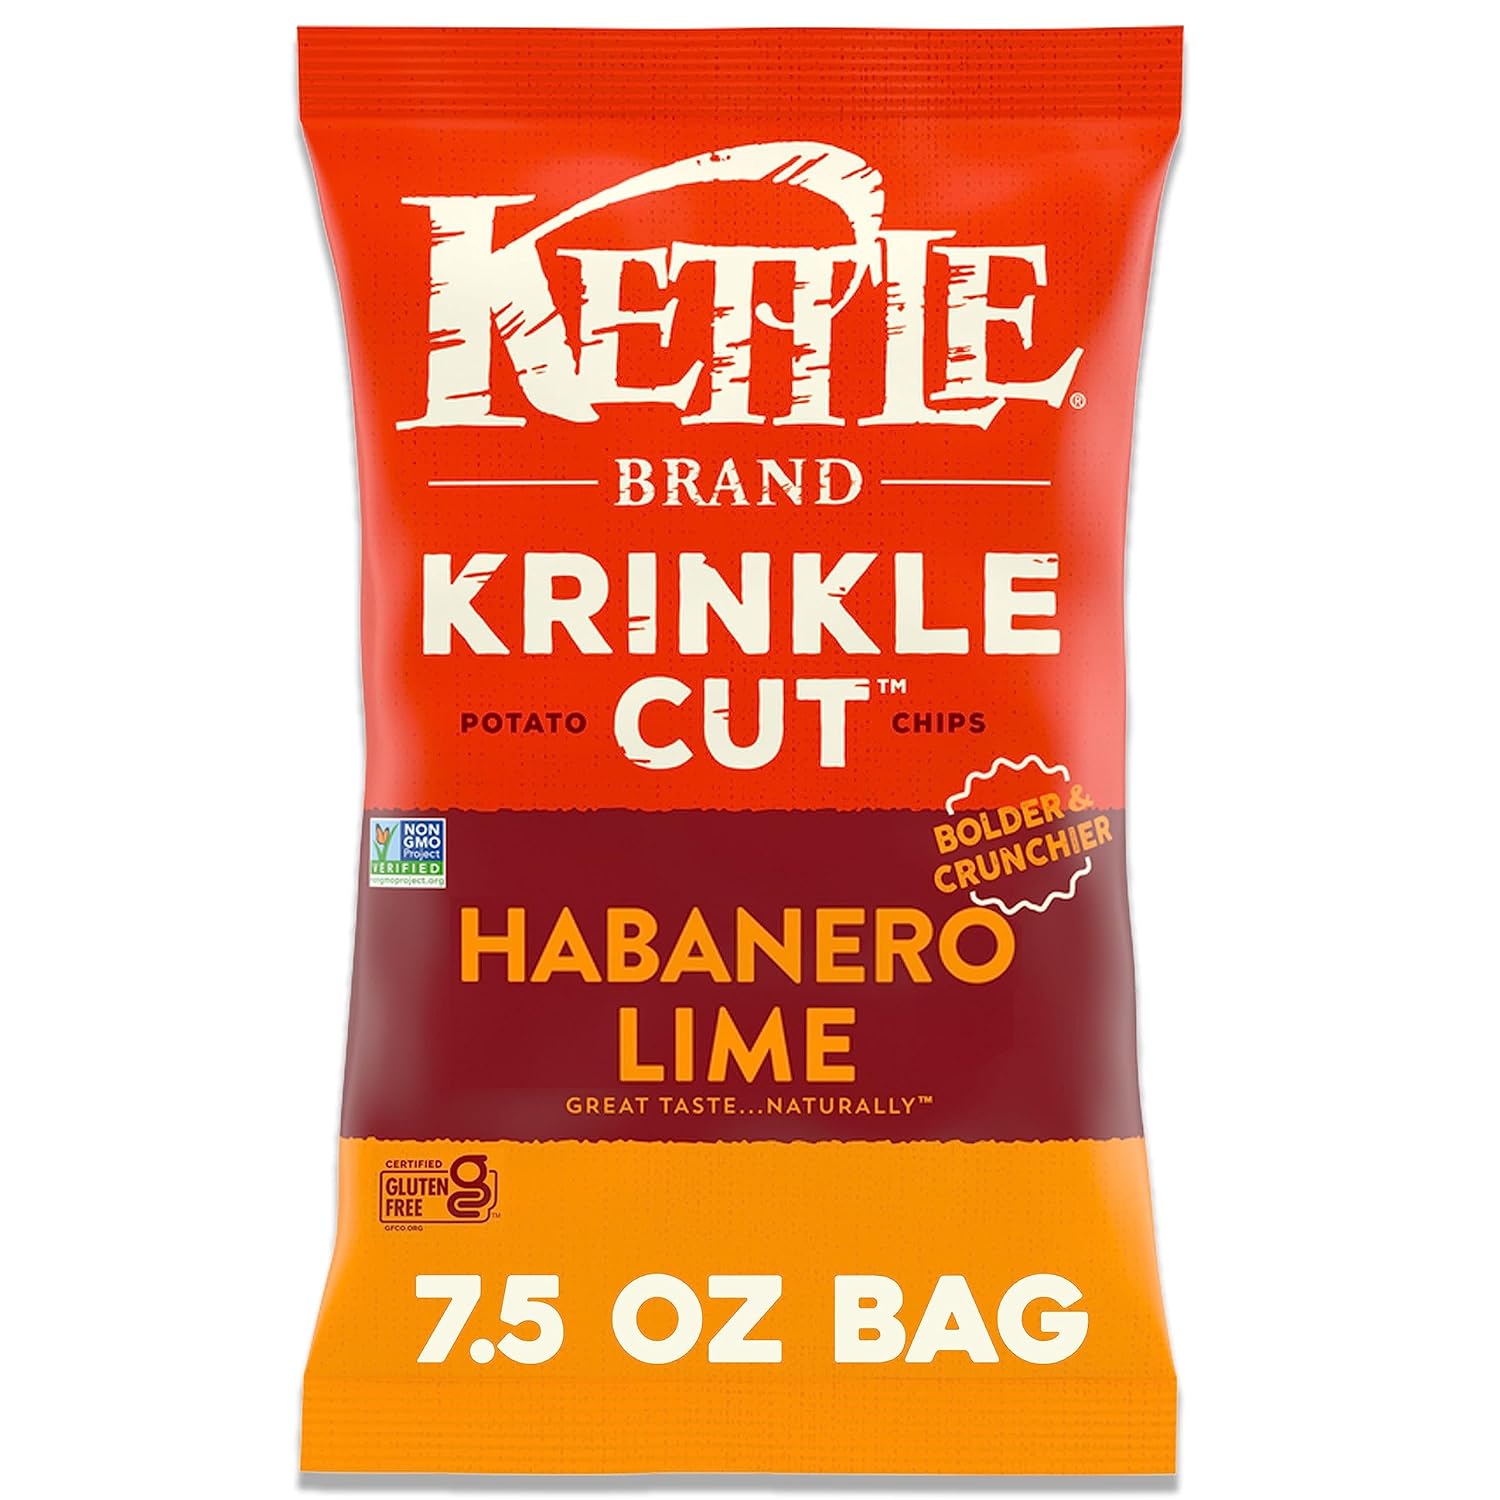 7.5-Oz Kettle Brand Potato Chips (Habanero Lime) $2.44 w/ S&S + Free Shipping w/ Prime or on orders over $35